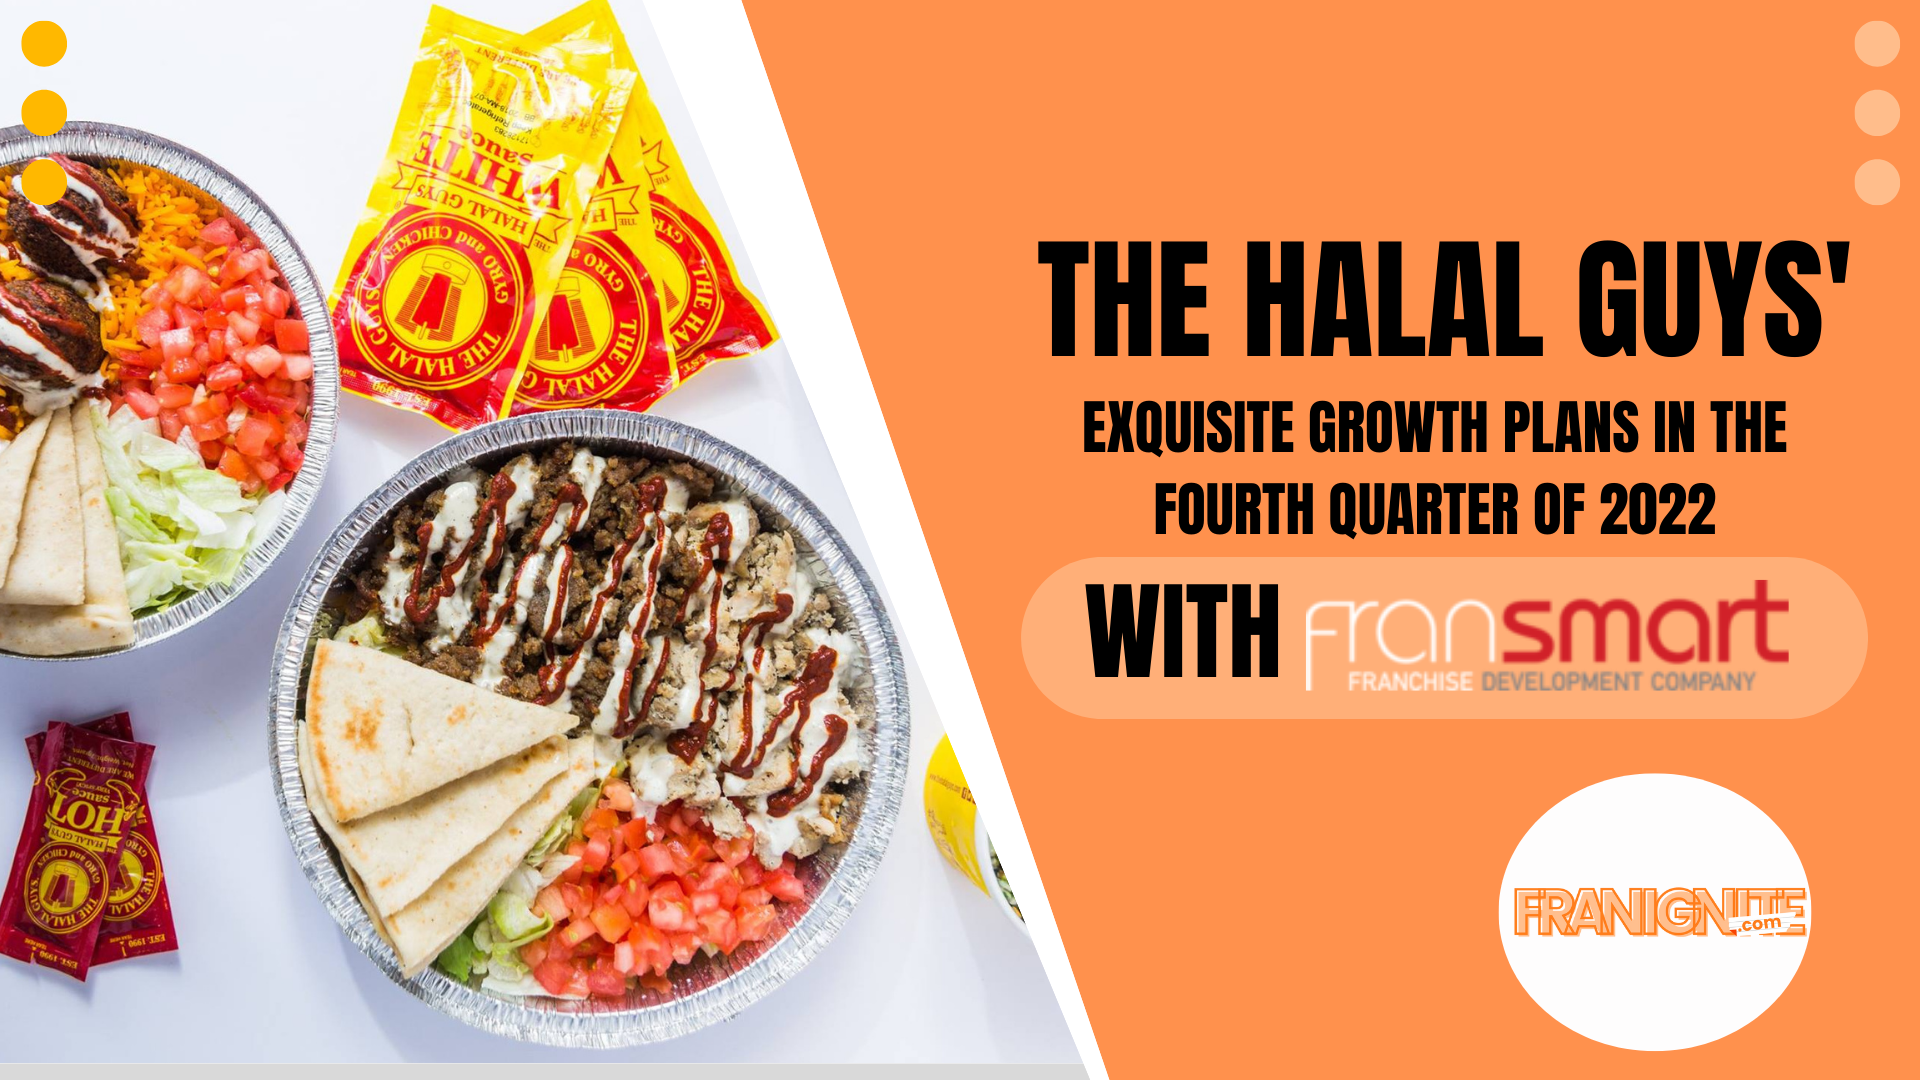 The Halal Guys’ new target of four hundred outlets worldwide is coming to life with their exquisite fourth-quarter goals of 2022.